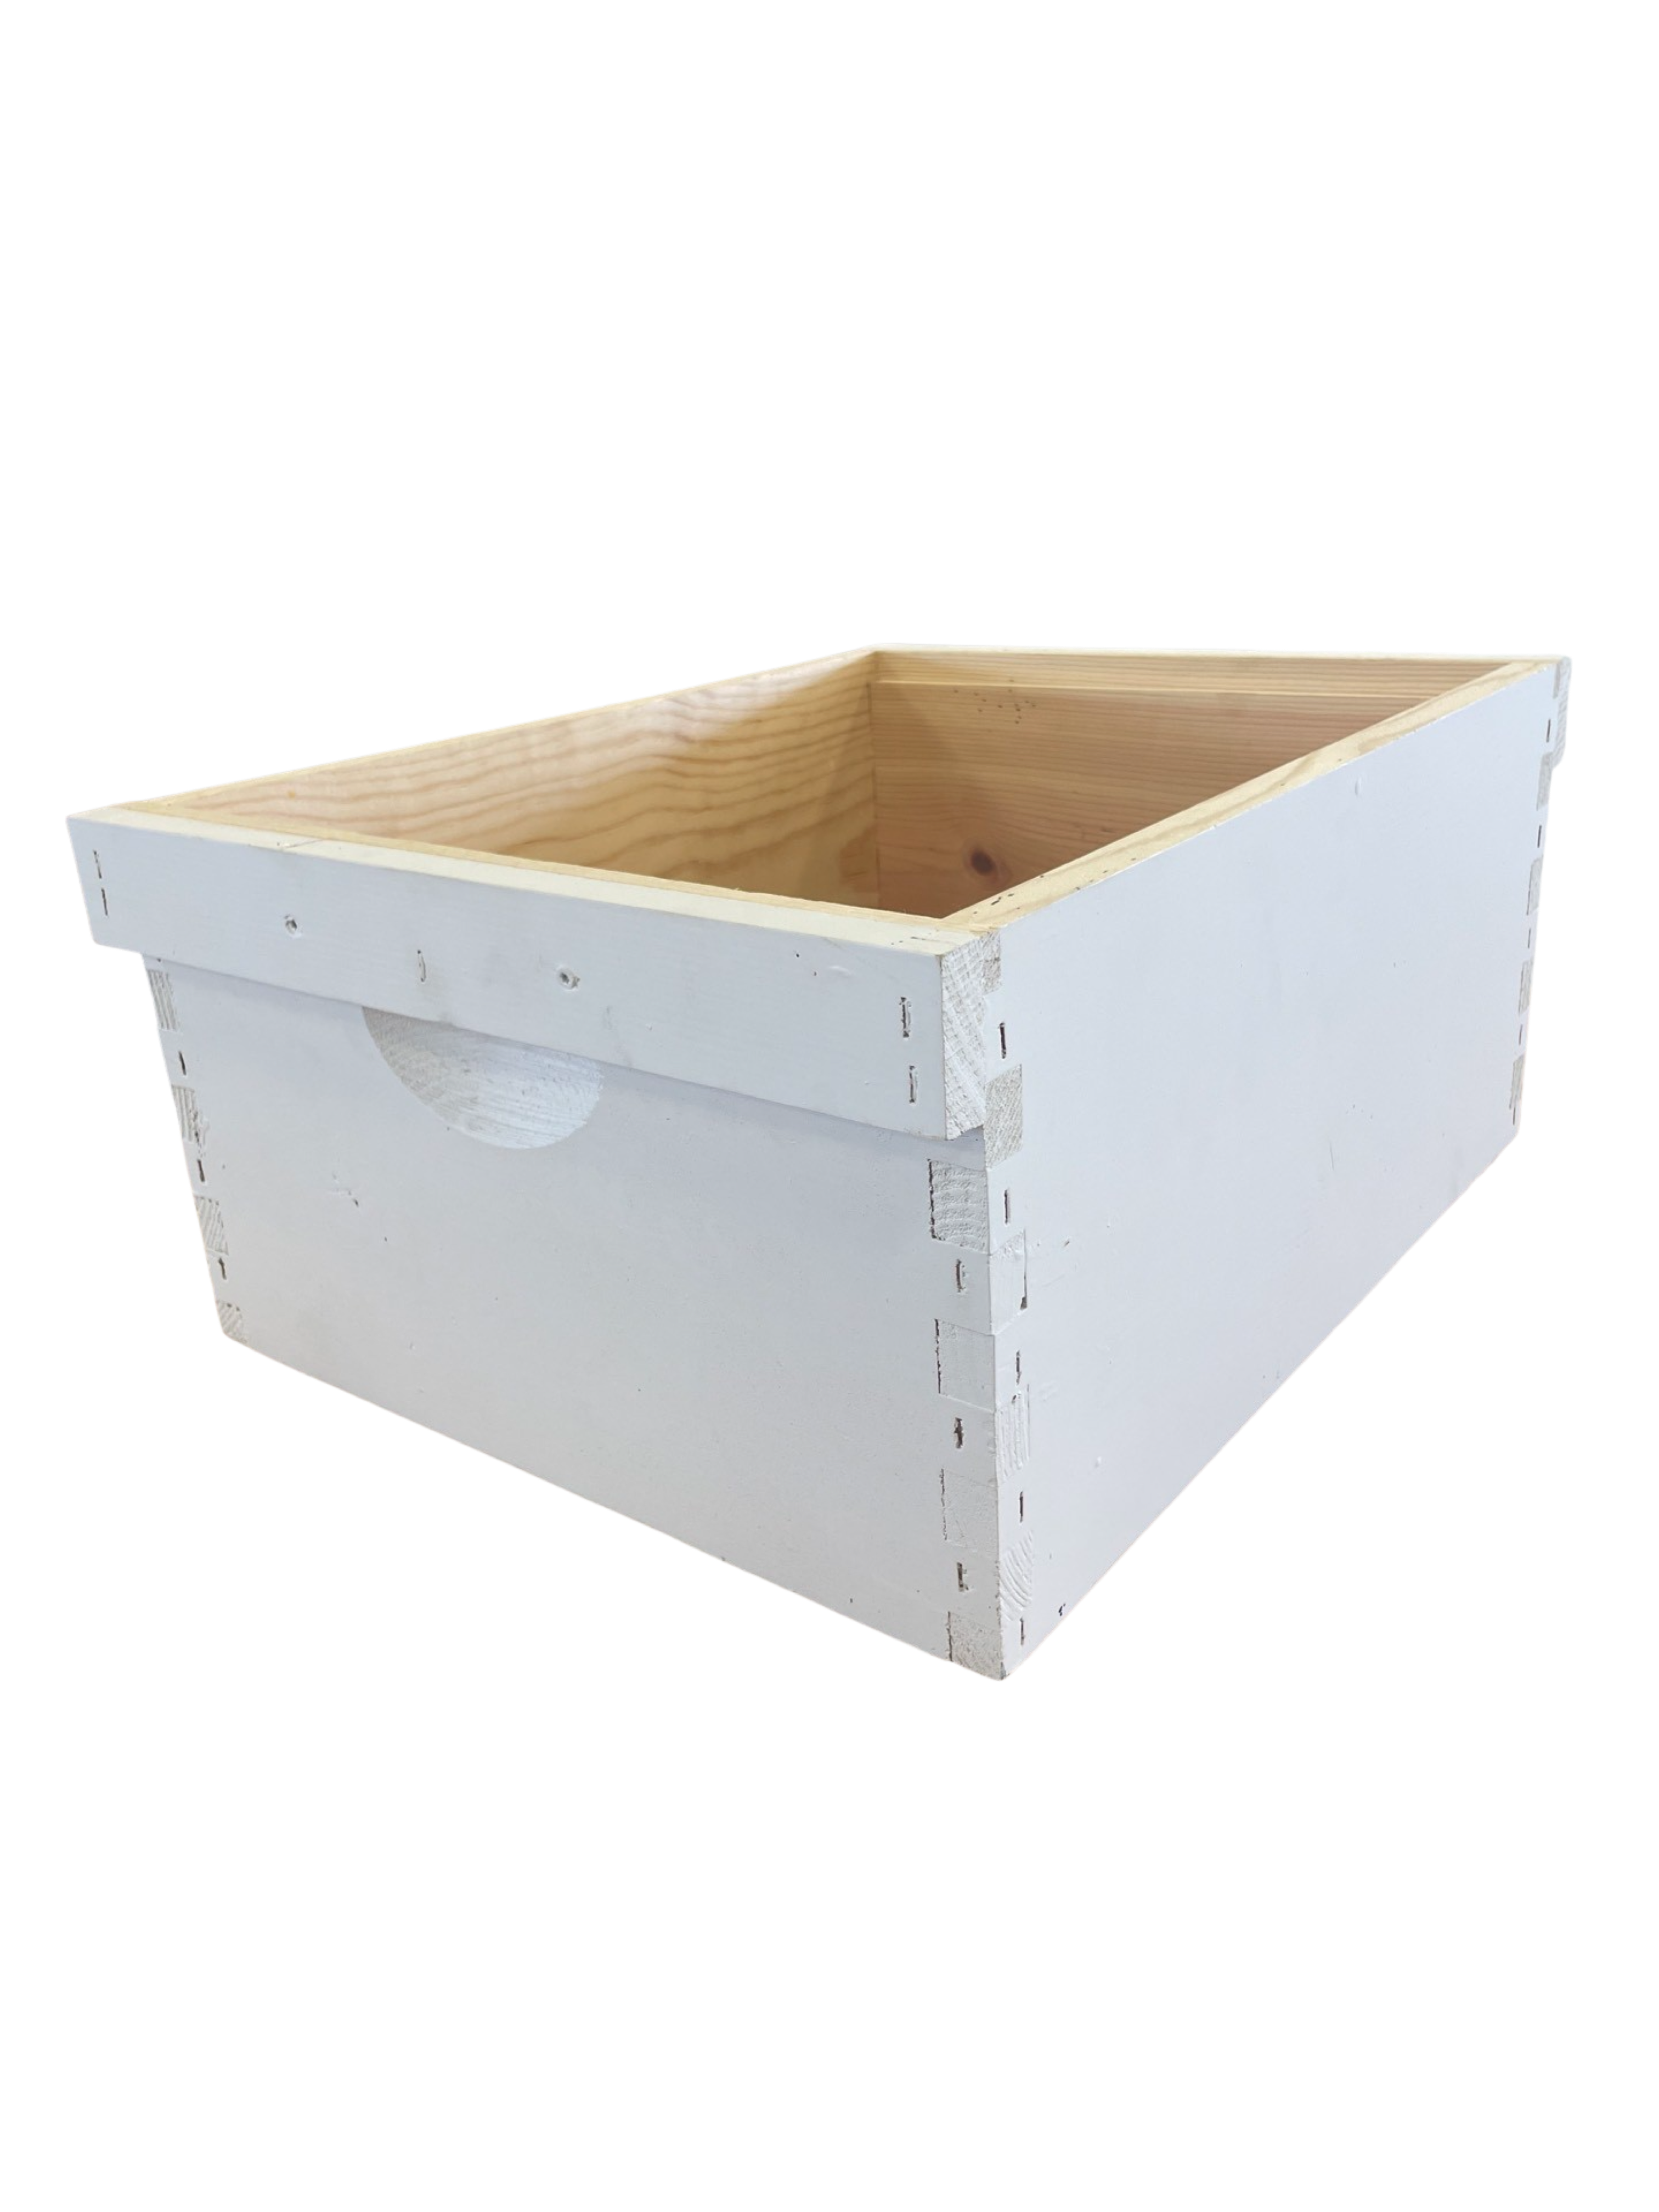 Deep (9 5/8") Hive Box | Cleated | Painted